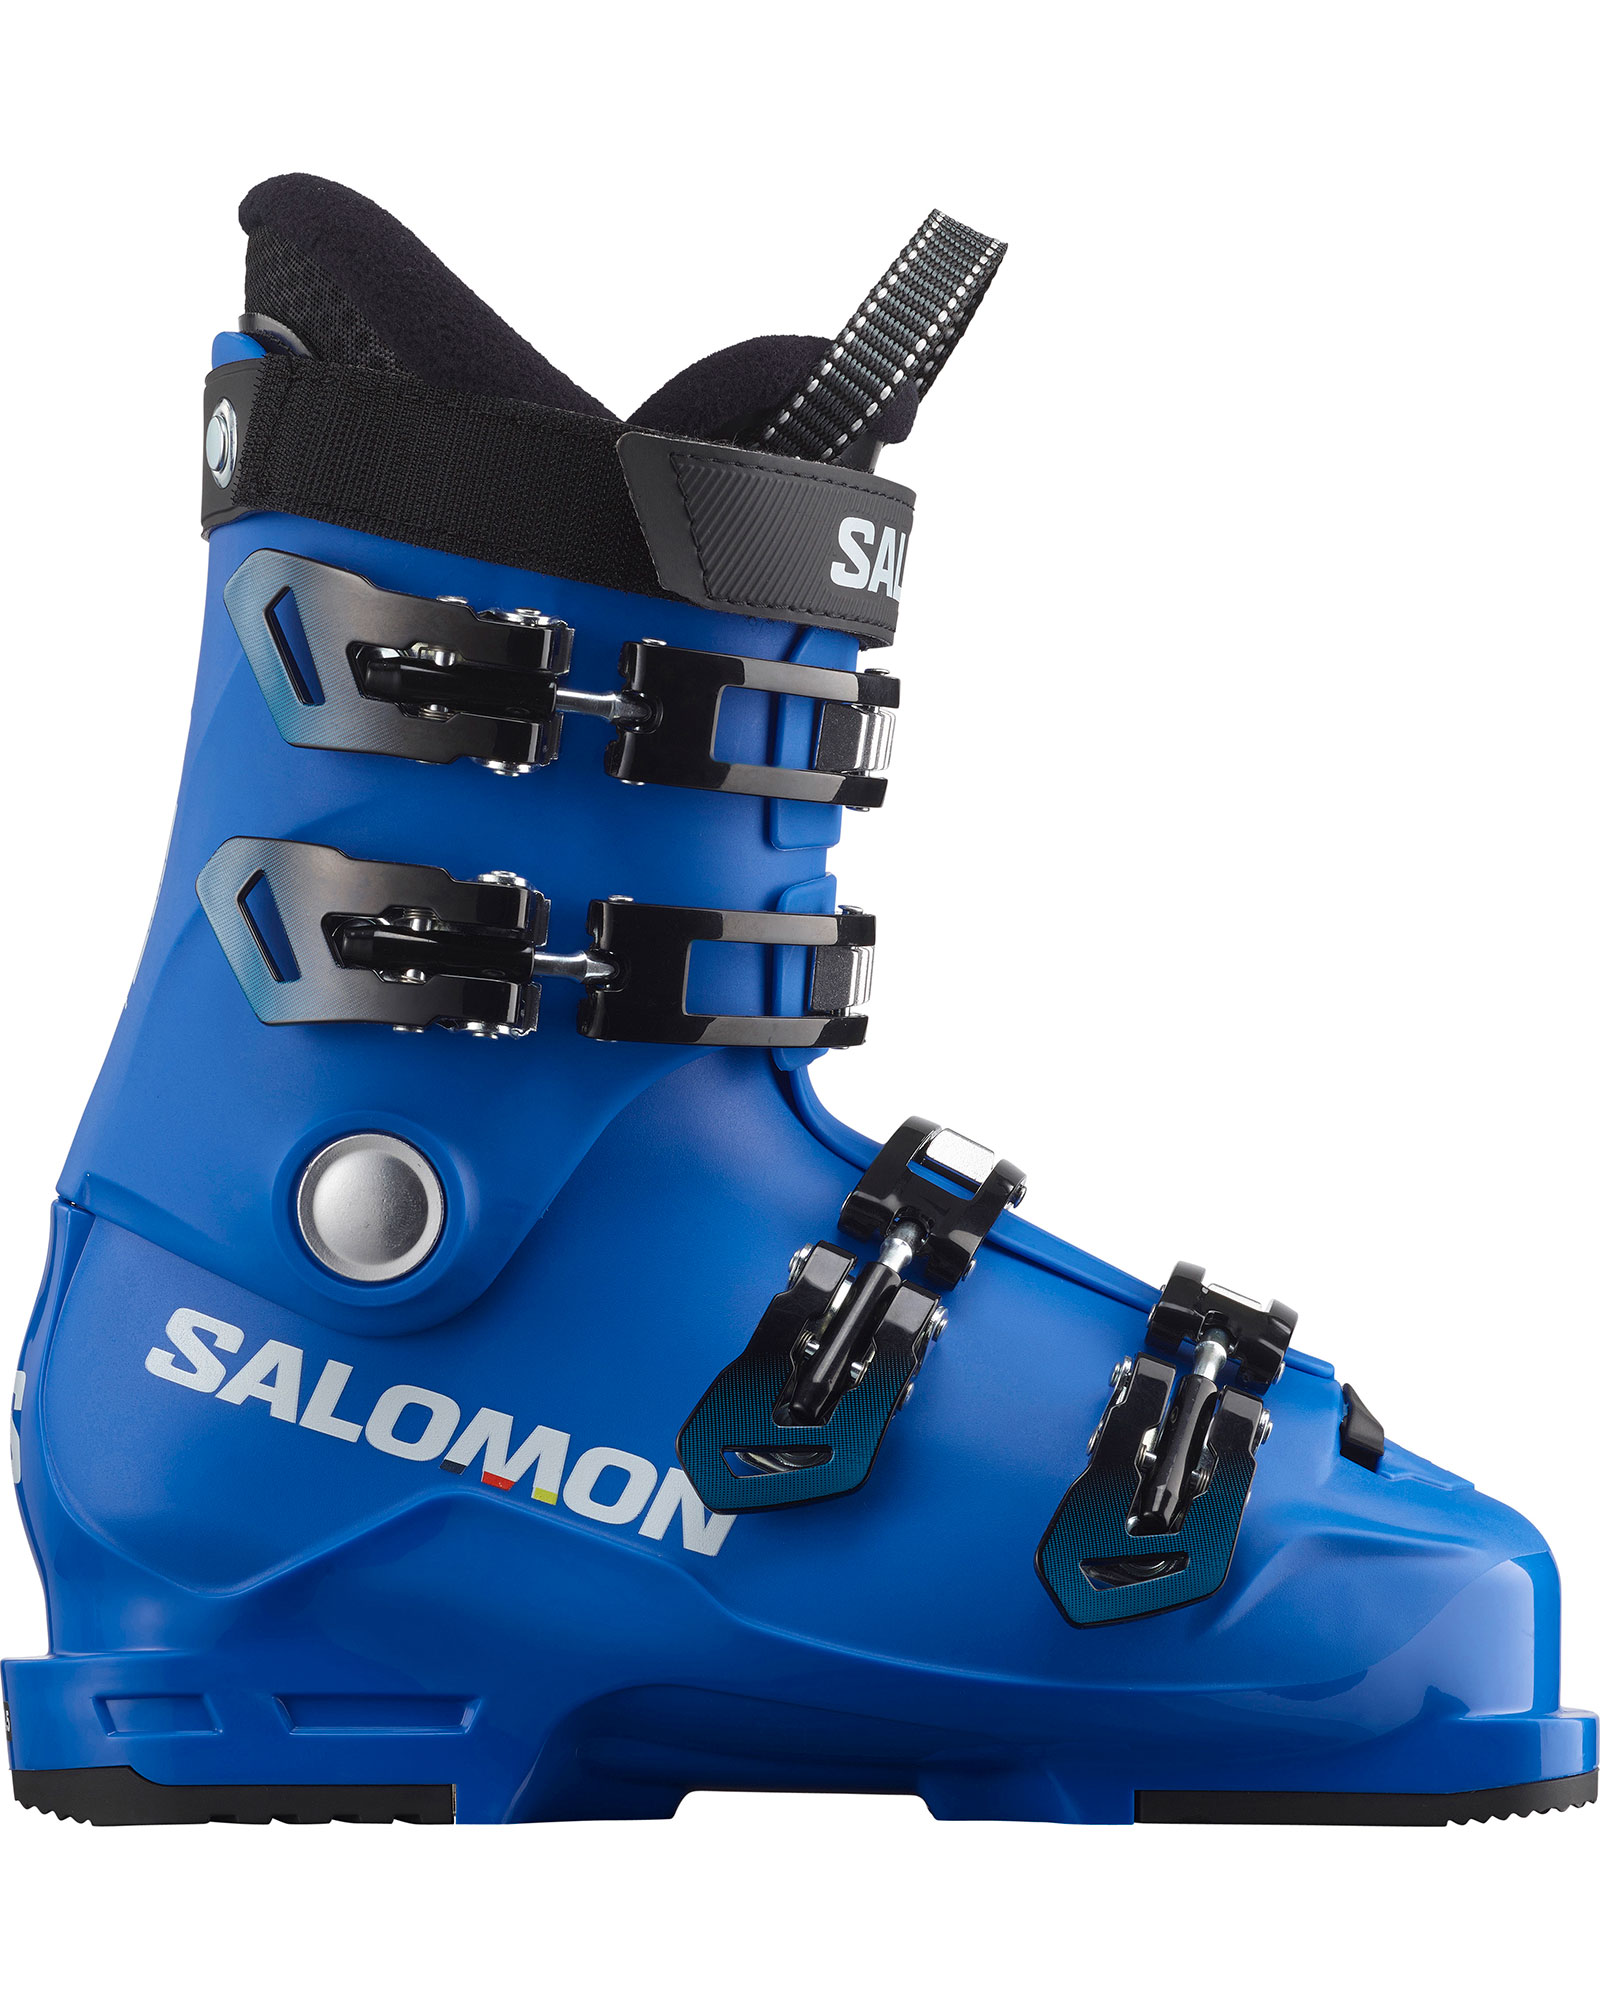 Salomon S/Race 60T L (size 25.0 and over) Youth Ski Boots 2024 - Race Blue/White/Process Blue MP 25.0